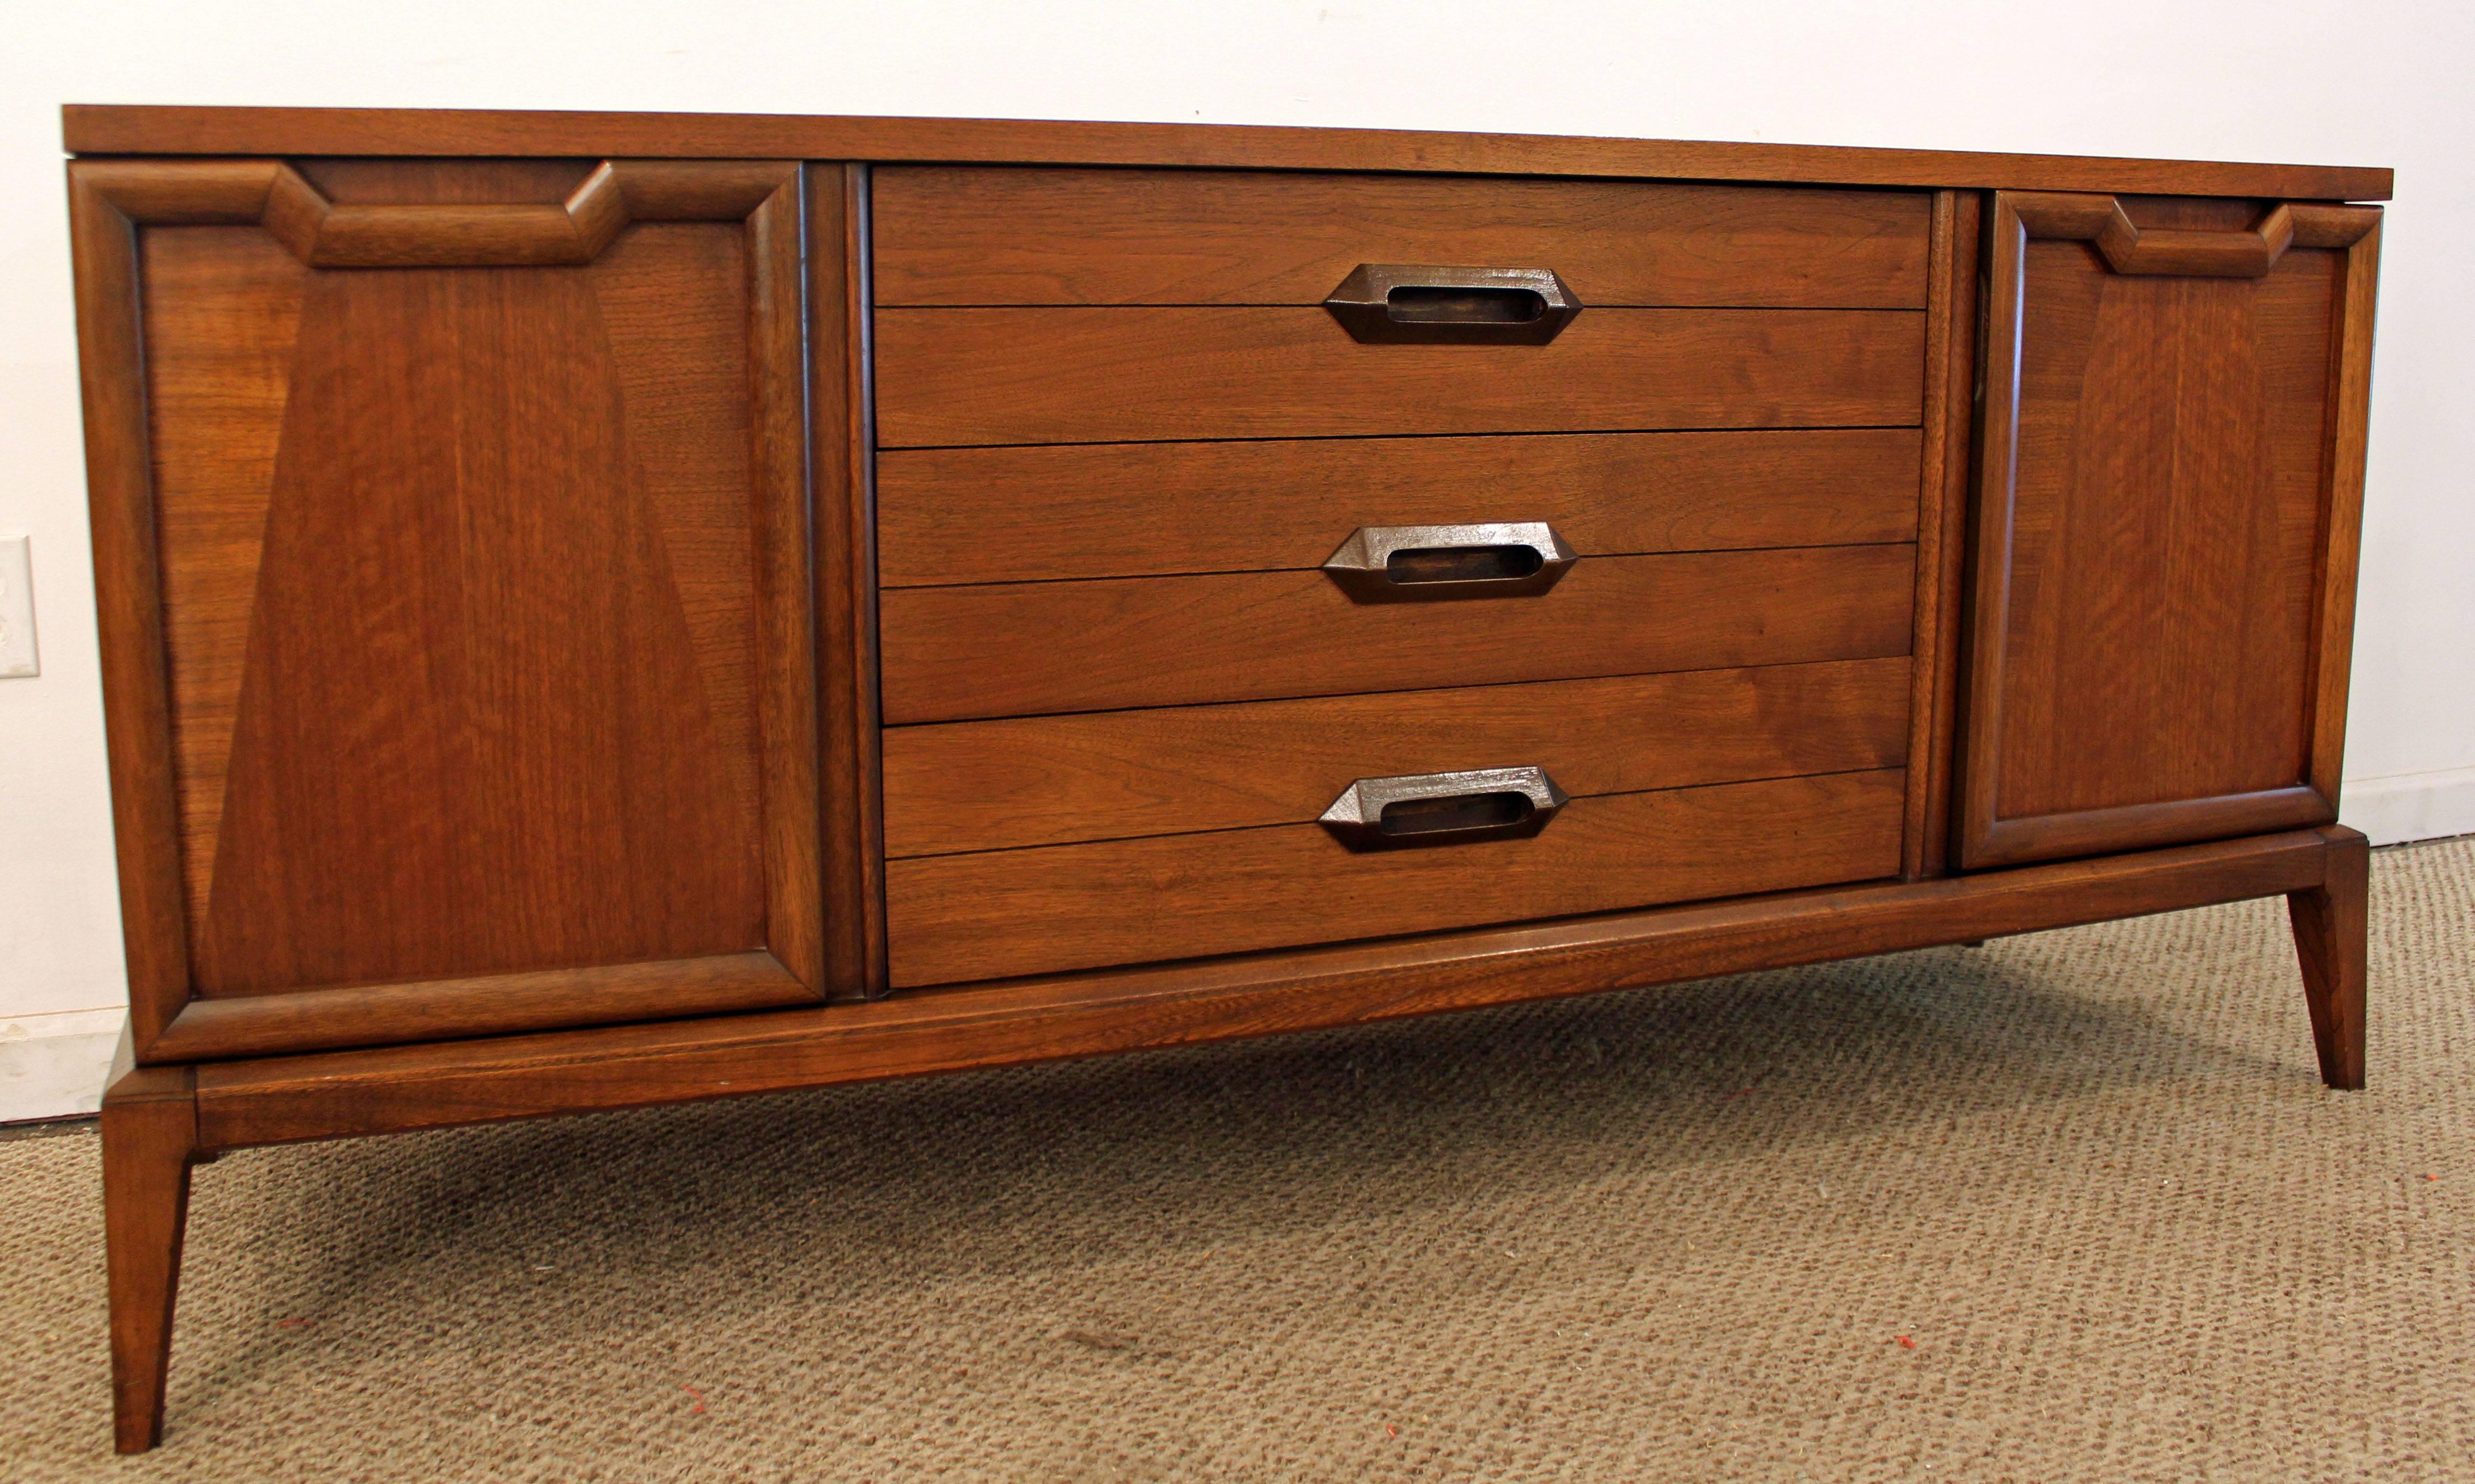 Offered is a walnut credenza by Basic Witz. It has two parqueted doors with shelving inside and three drawers centered. In excellent condition, has been refinished.